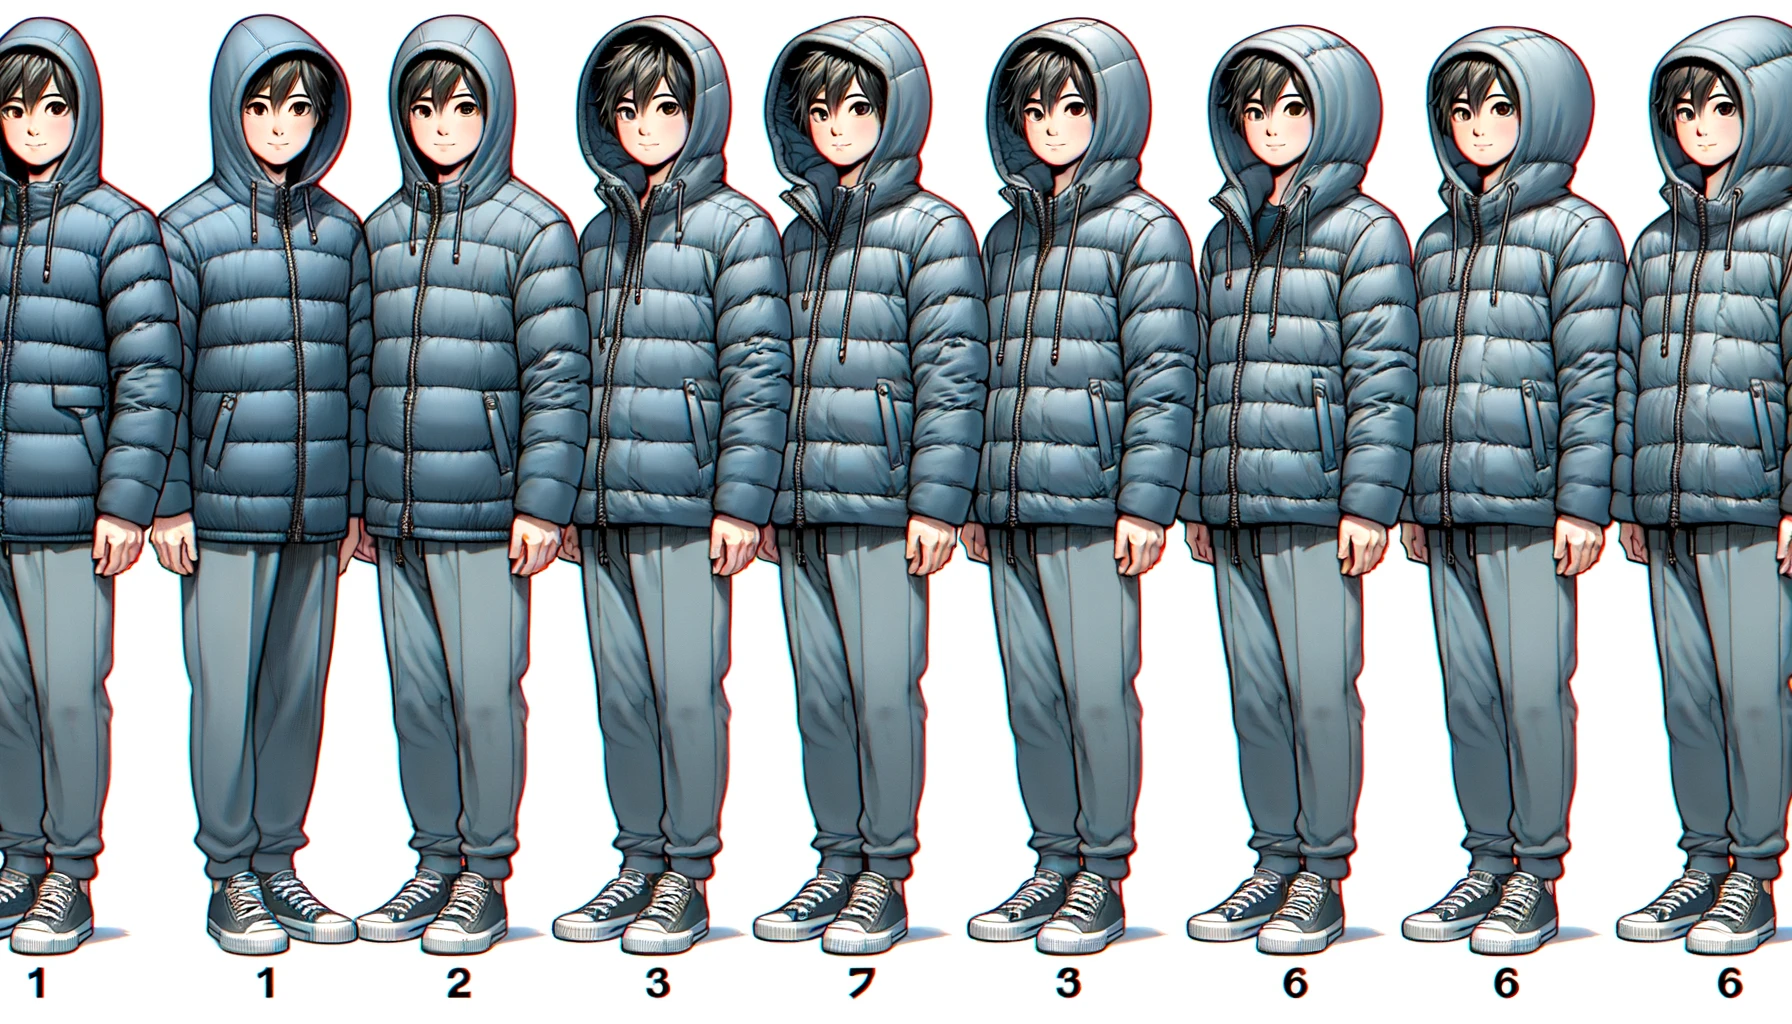 A Japanese person wearing a hooded down jacket, showing how it fits on the body in different poses to illustrate the size and fit of the jacket.